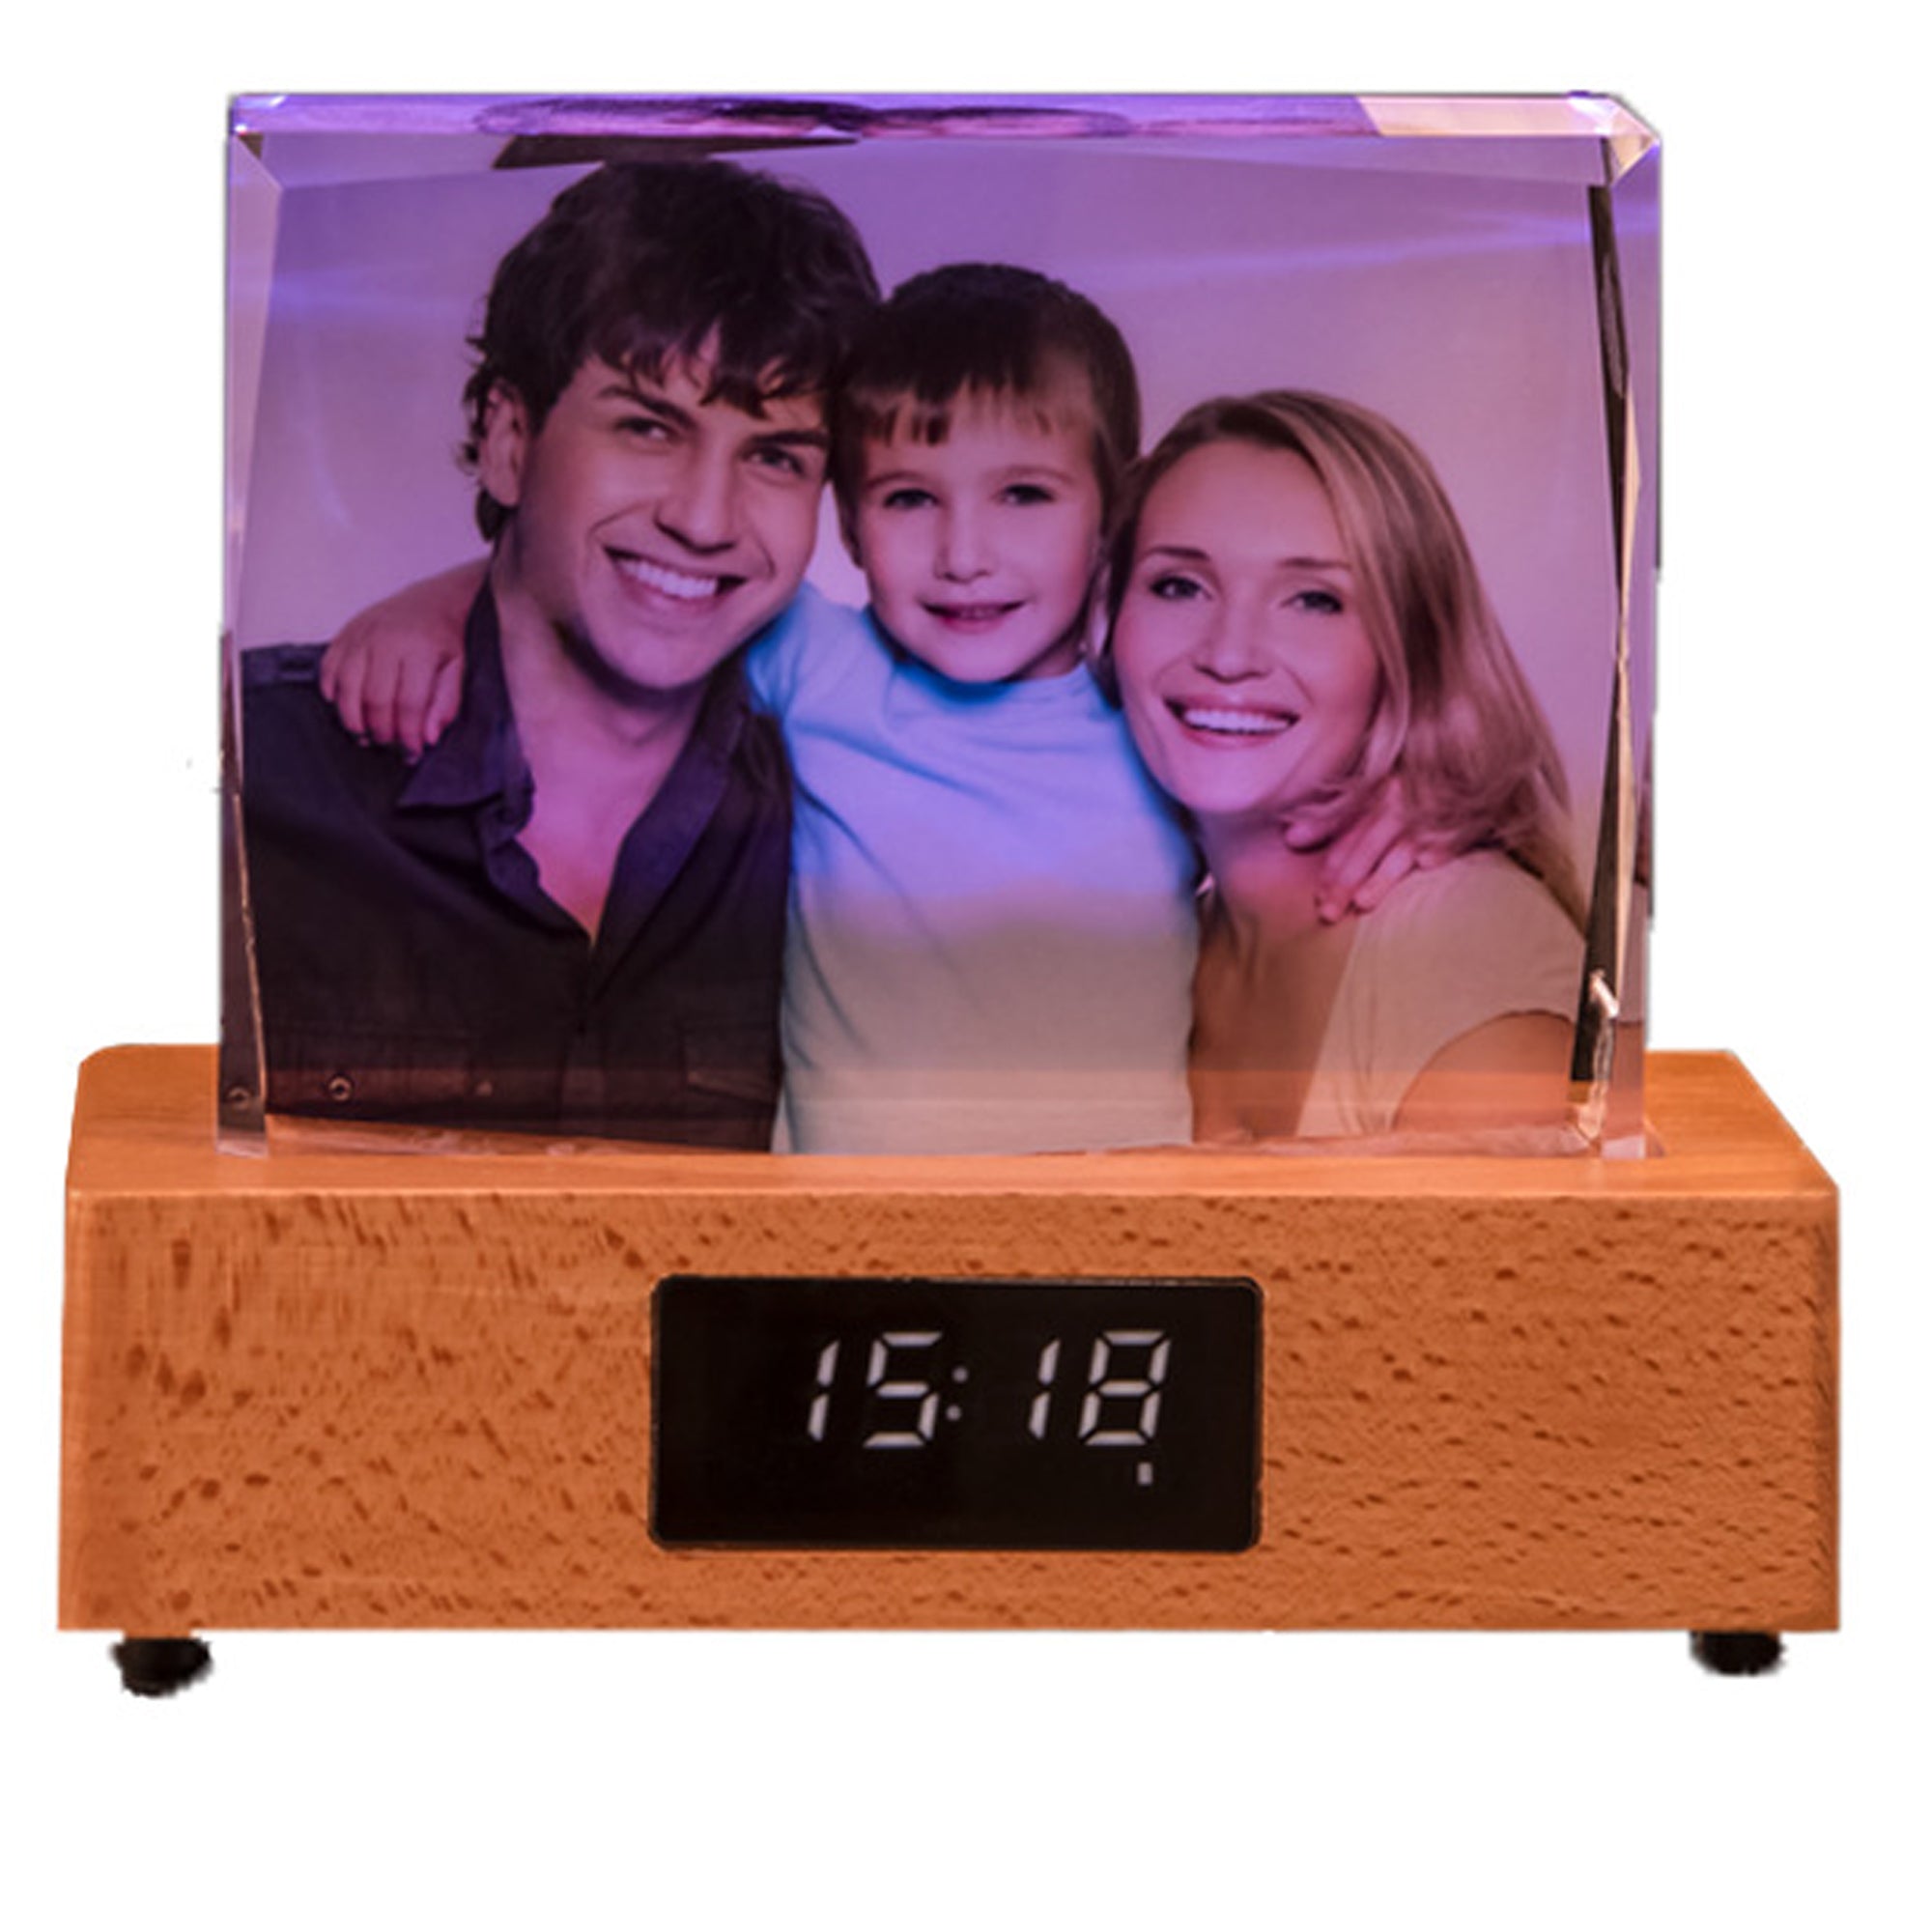 Photo Custom 3D Crystal with Bluetooth Music Speaker + 7 Color LED Night Light, Wooden Base,   Personalized Photo Engraved Inside The Crystal with Your Own Picture for Husband, Wife, Mom, Dad, Men, Women, Great for Memorials and Anniversaries